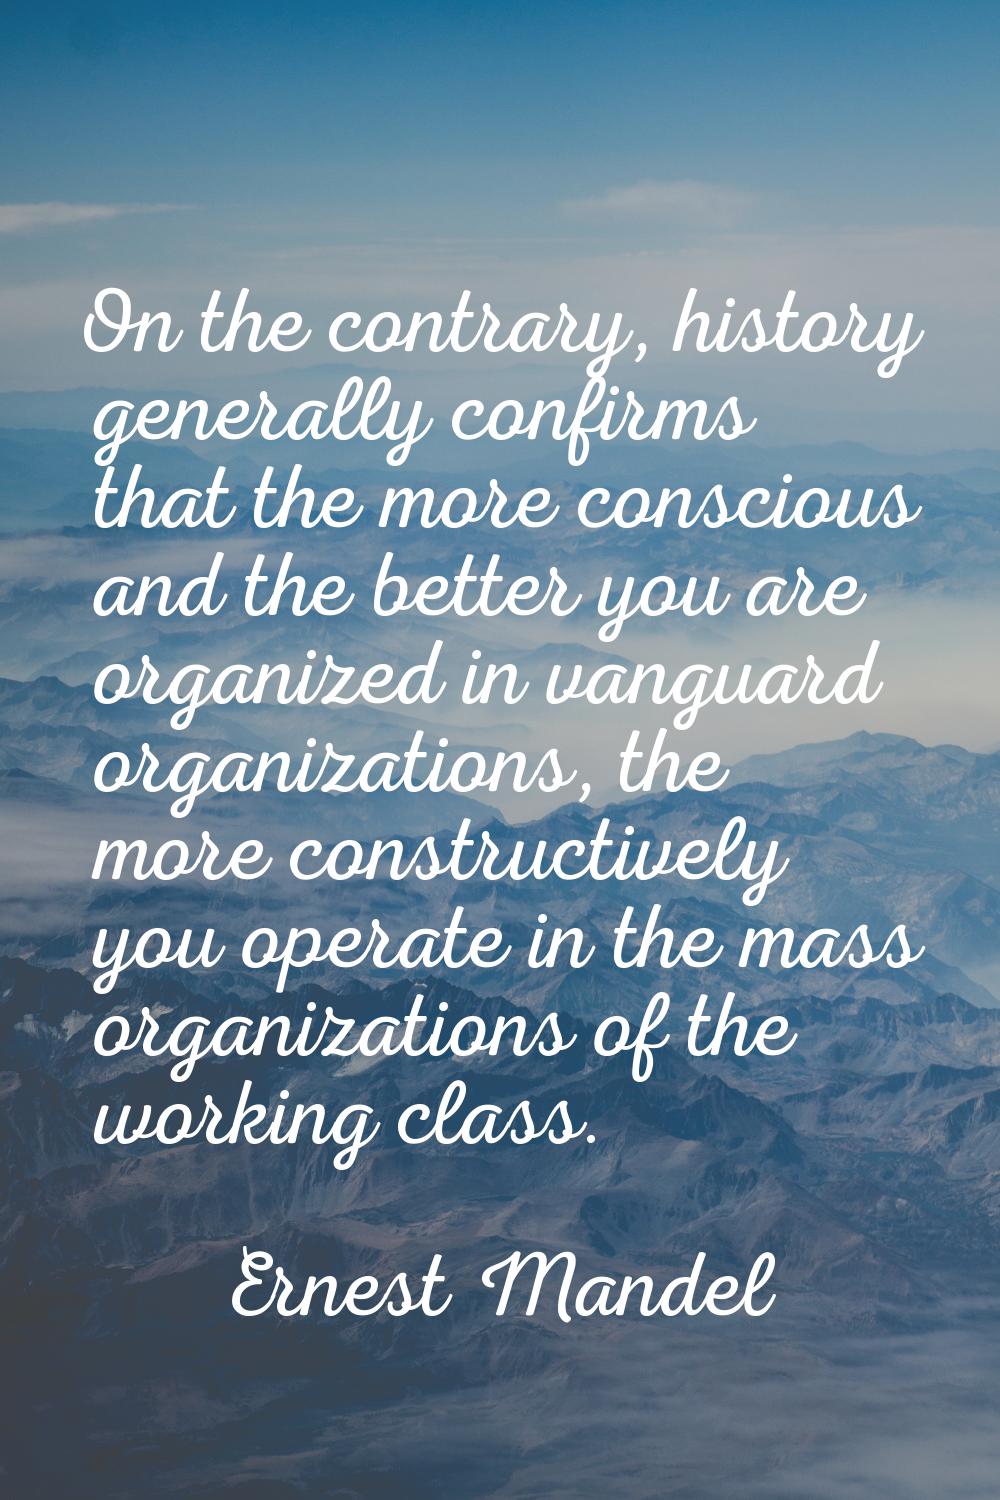 On the contrary, history generally confirms that the more conscious and the better you are organize